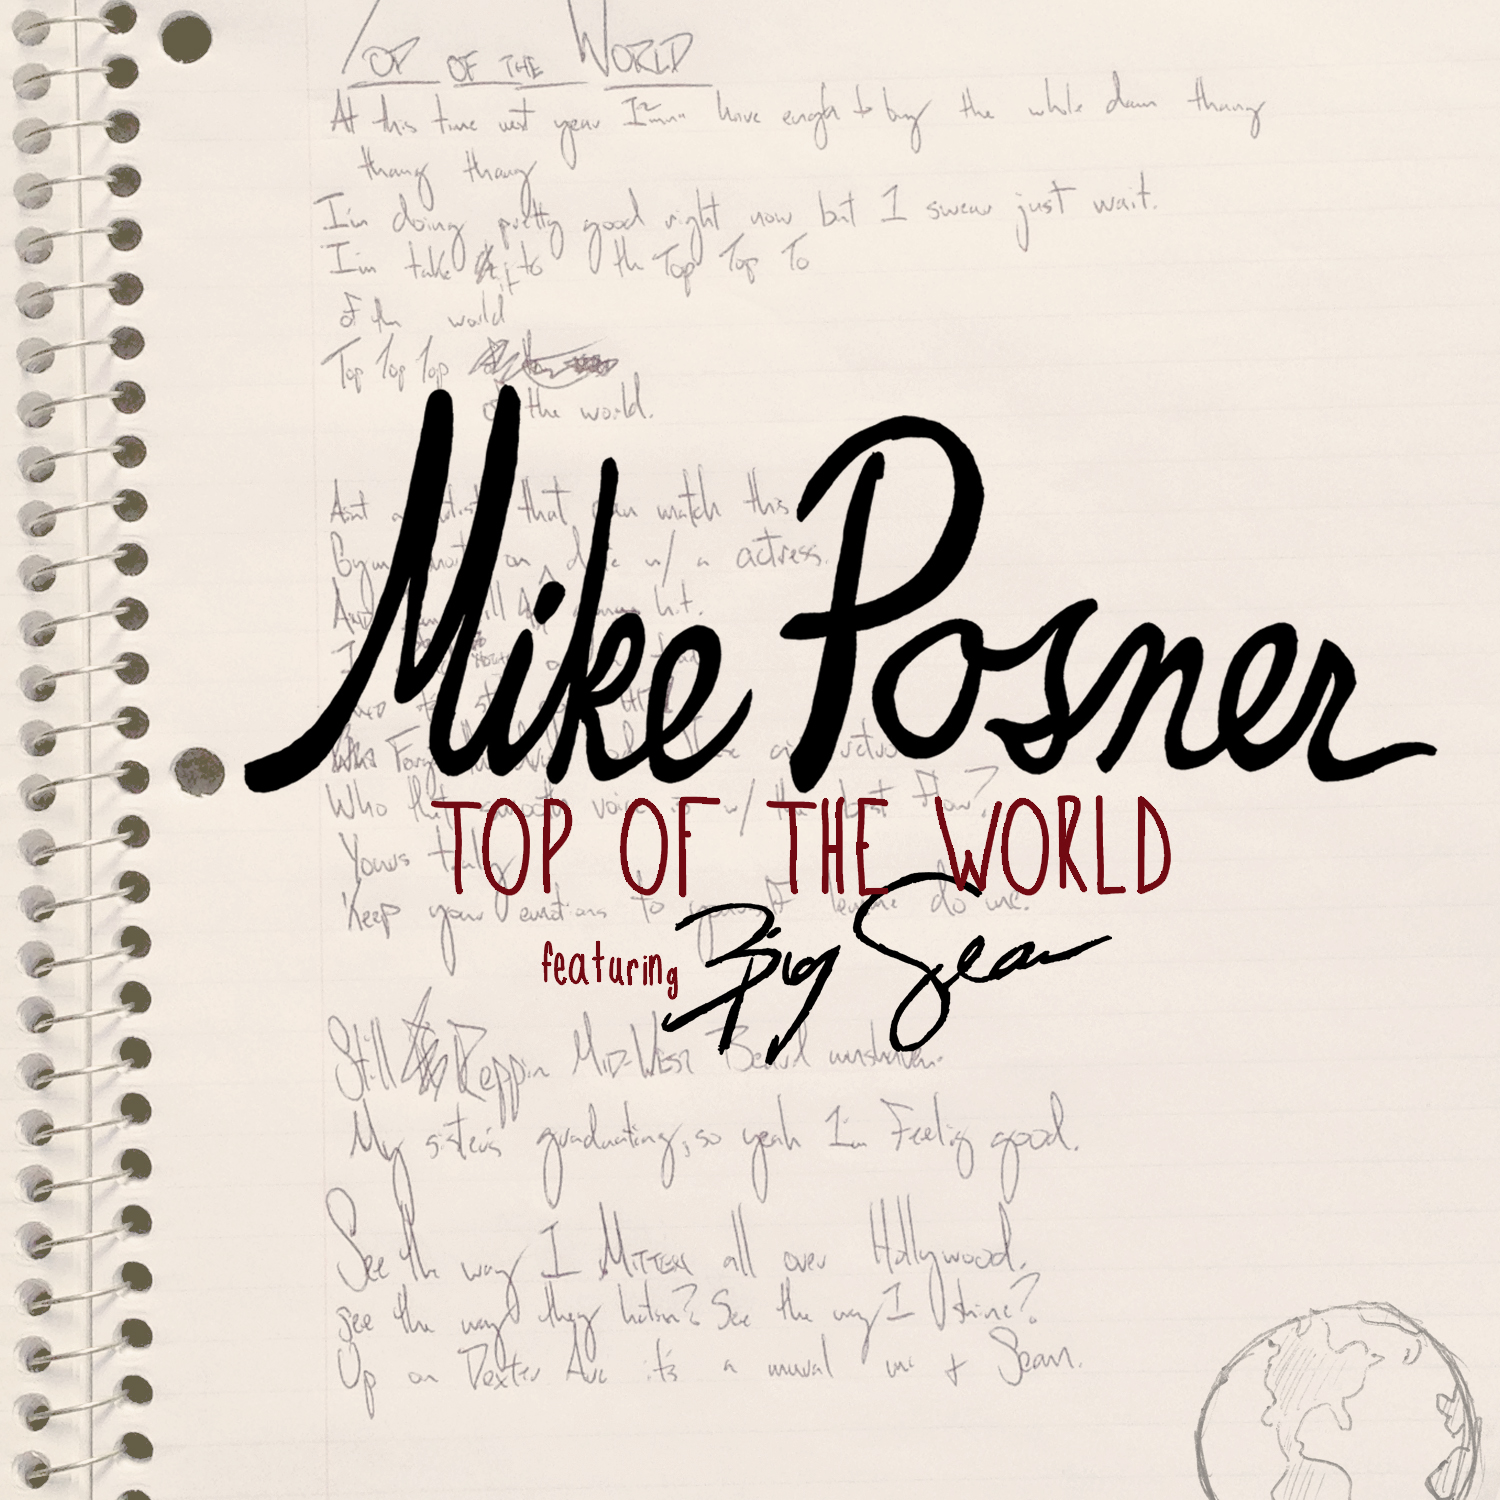 Mike Posner featuring Big Sean - Top Of The World
